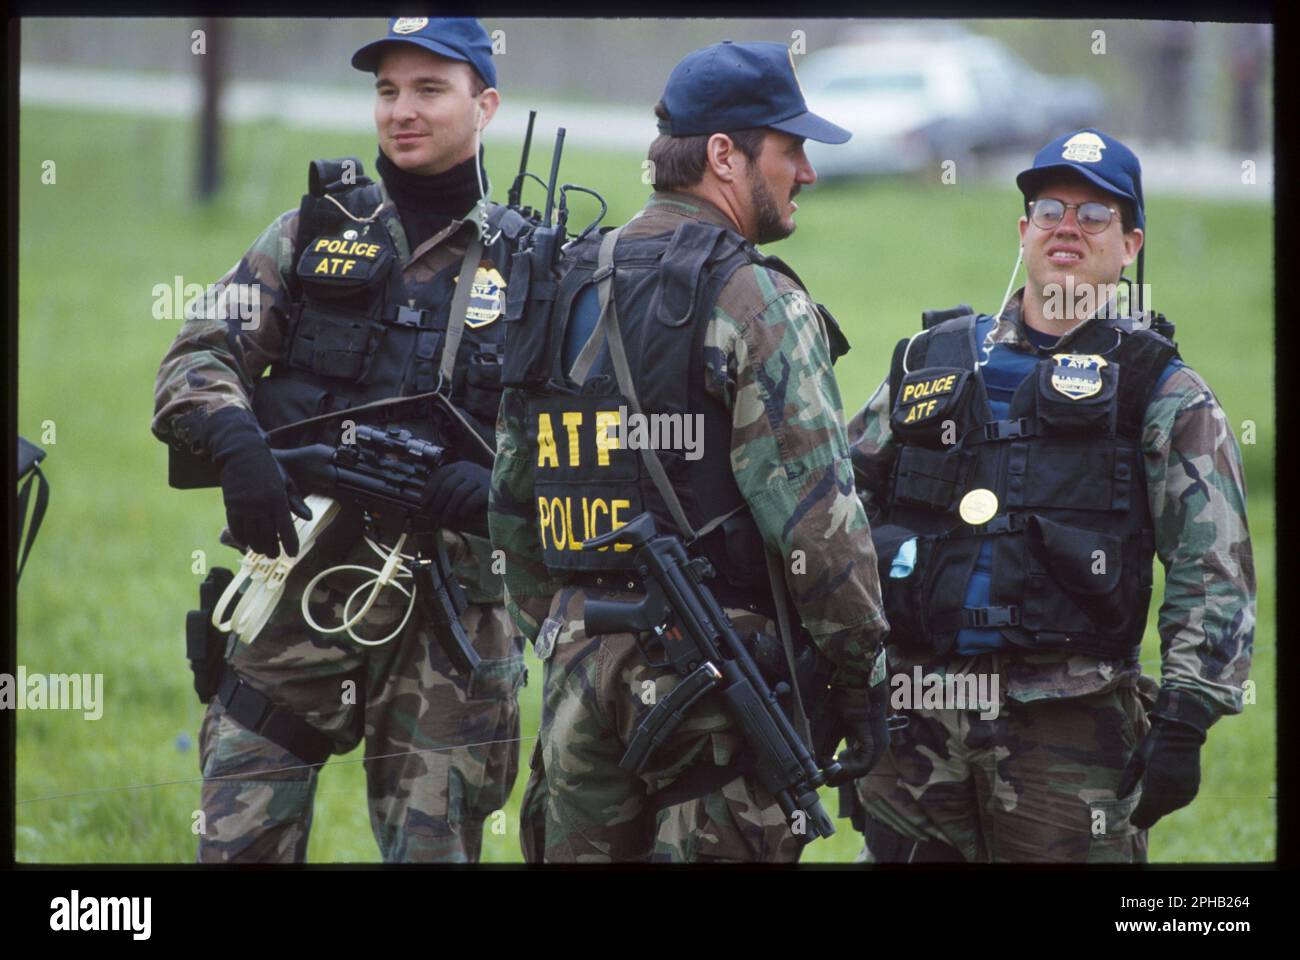 Waco Texas USA, March 1993: Heavily armed members of the federal bureau of Alcohol, Firearms and Tobacco (ATF) guard a road leading to the Branch Davidian compound in the midst of the 51-day standoff between law enforcement agencies and members of the Davidian religious group. ©Bob Daemmrich Stock Photo